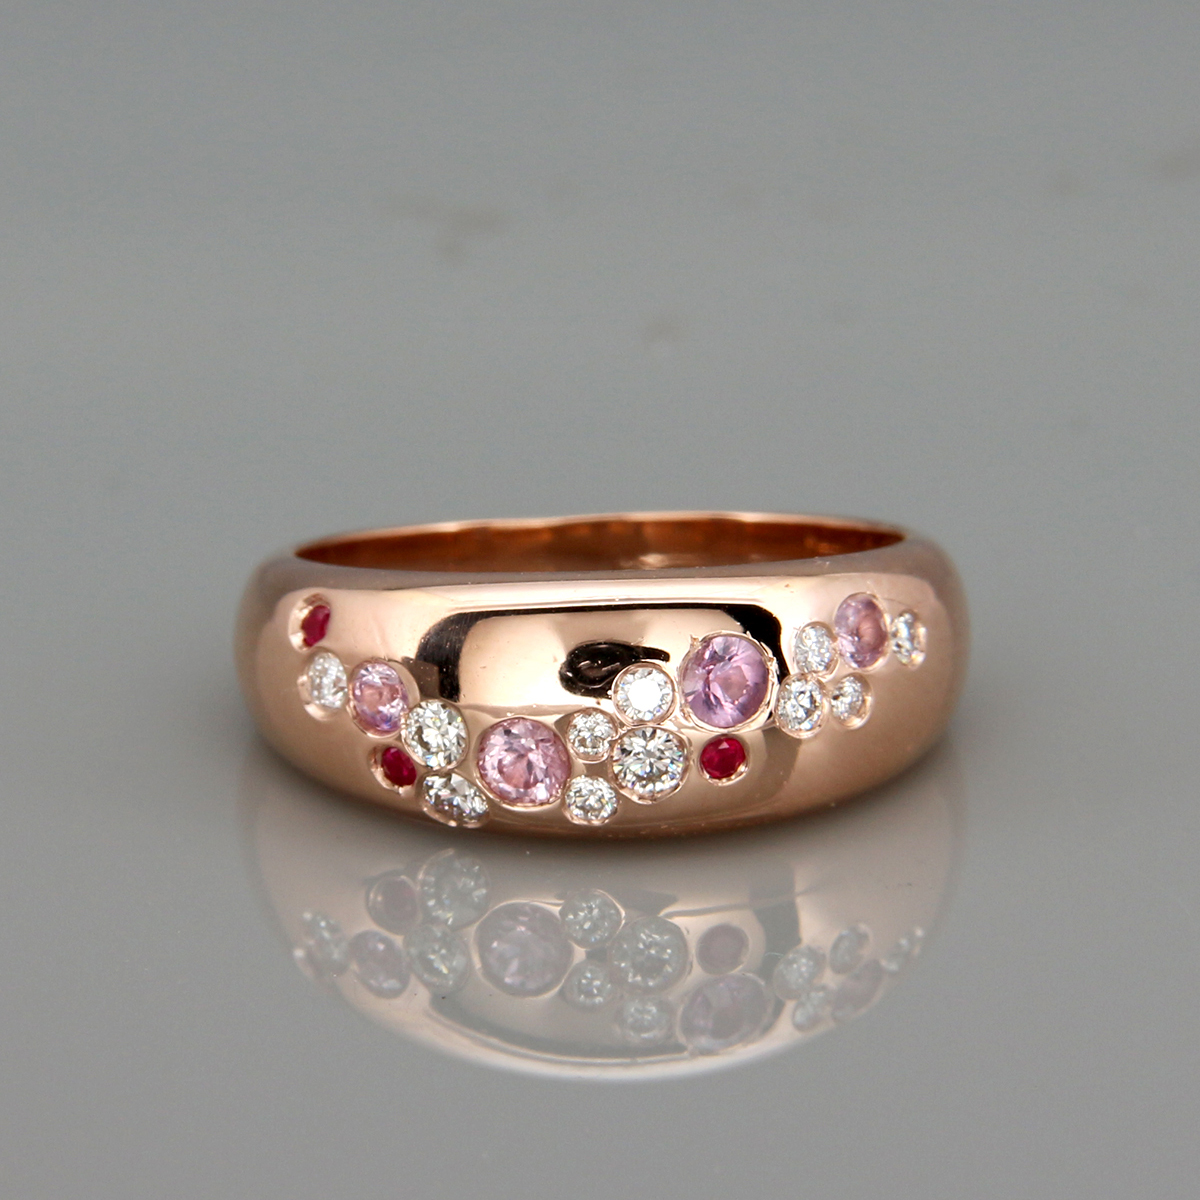 Cherry Blossom 14k Rose Gold Cluster Ring set with Diamonds Ruby and Pink Sapphire |14k rose gold ring inspired by the cherry blossom